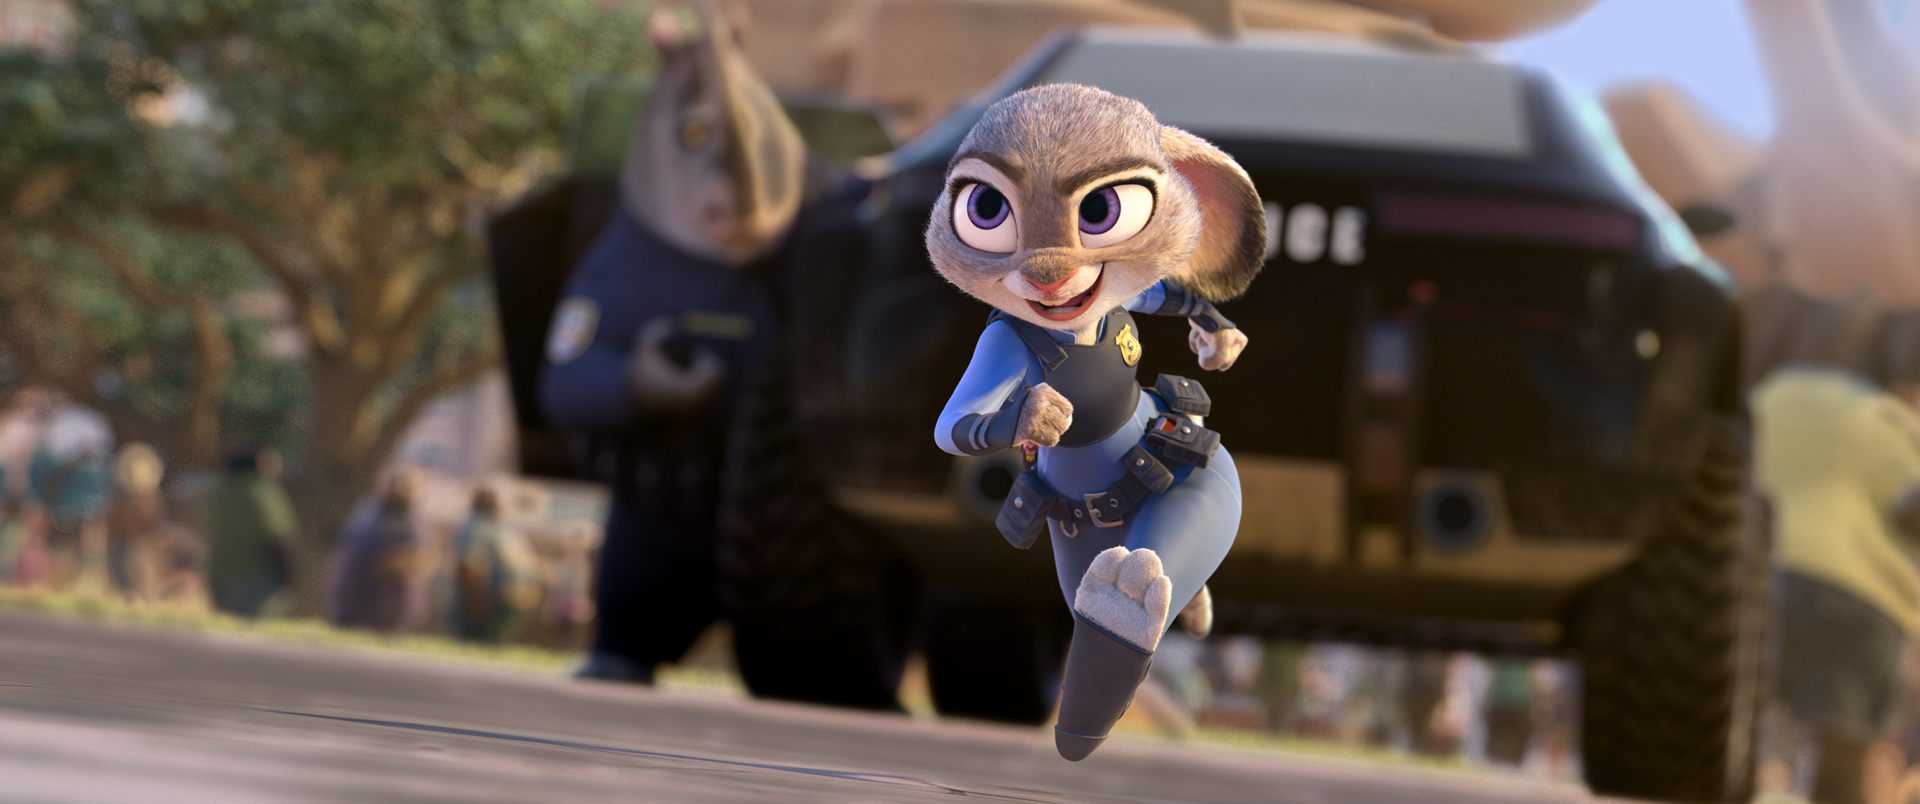 Disney’s ‘Zootopia’ Now Available on Blu-ray & Digital HD